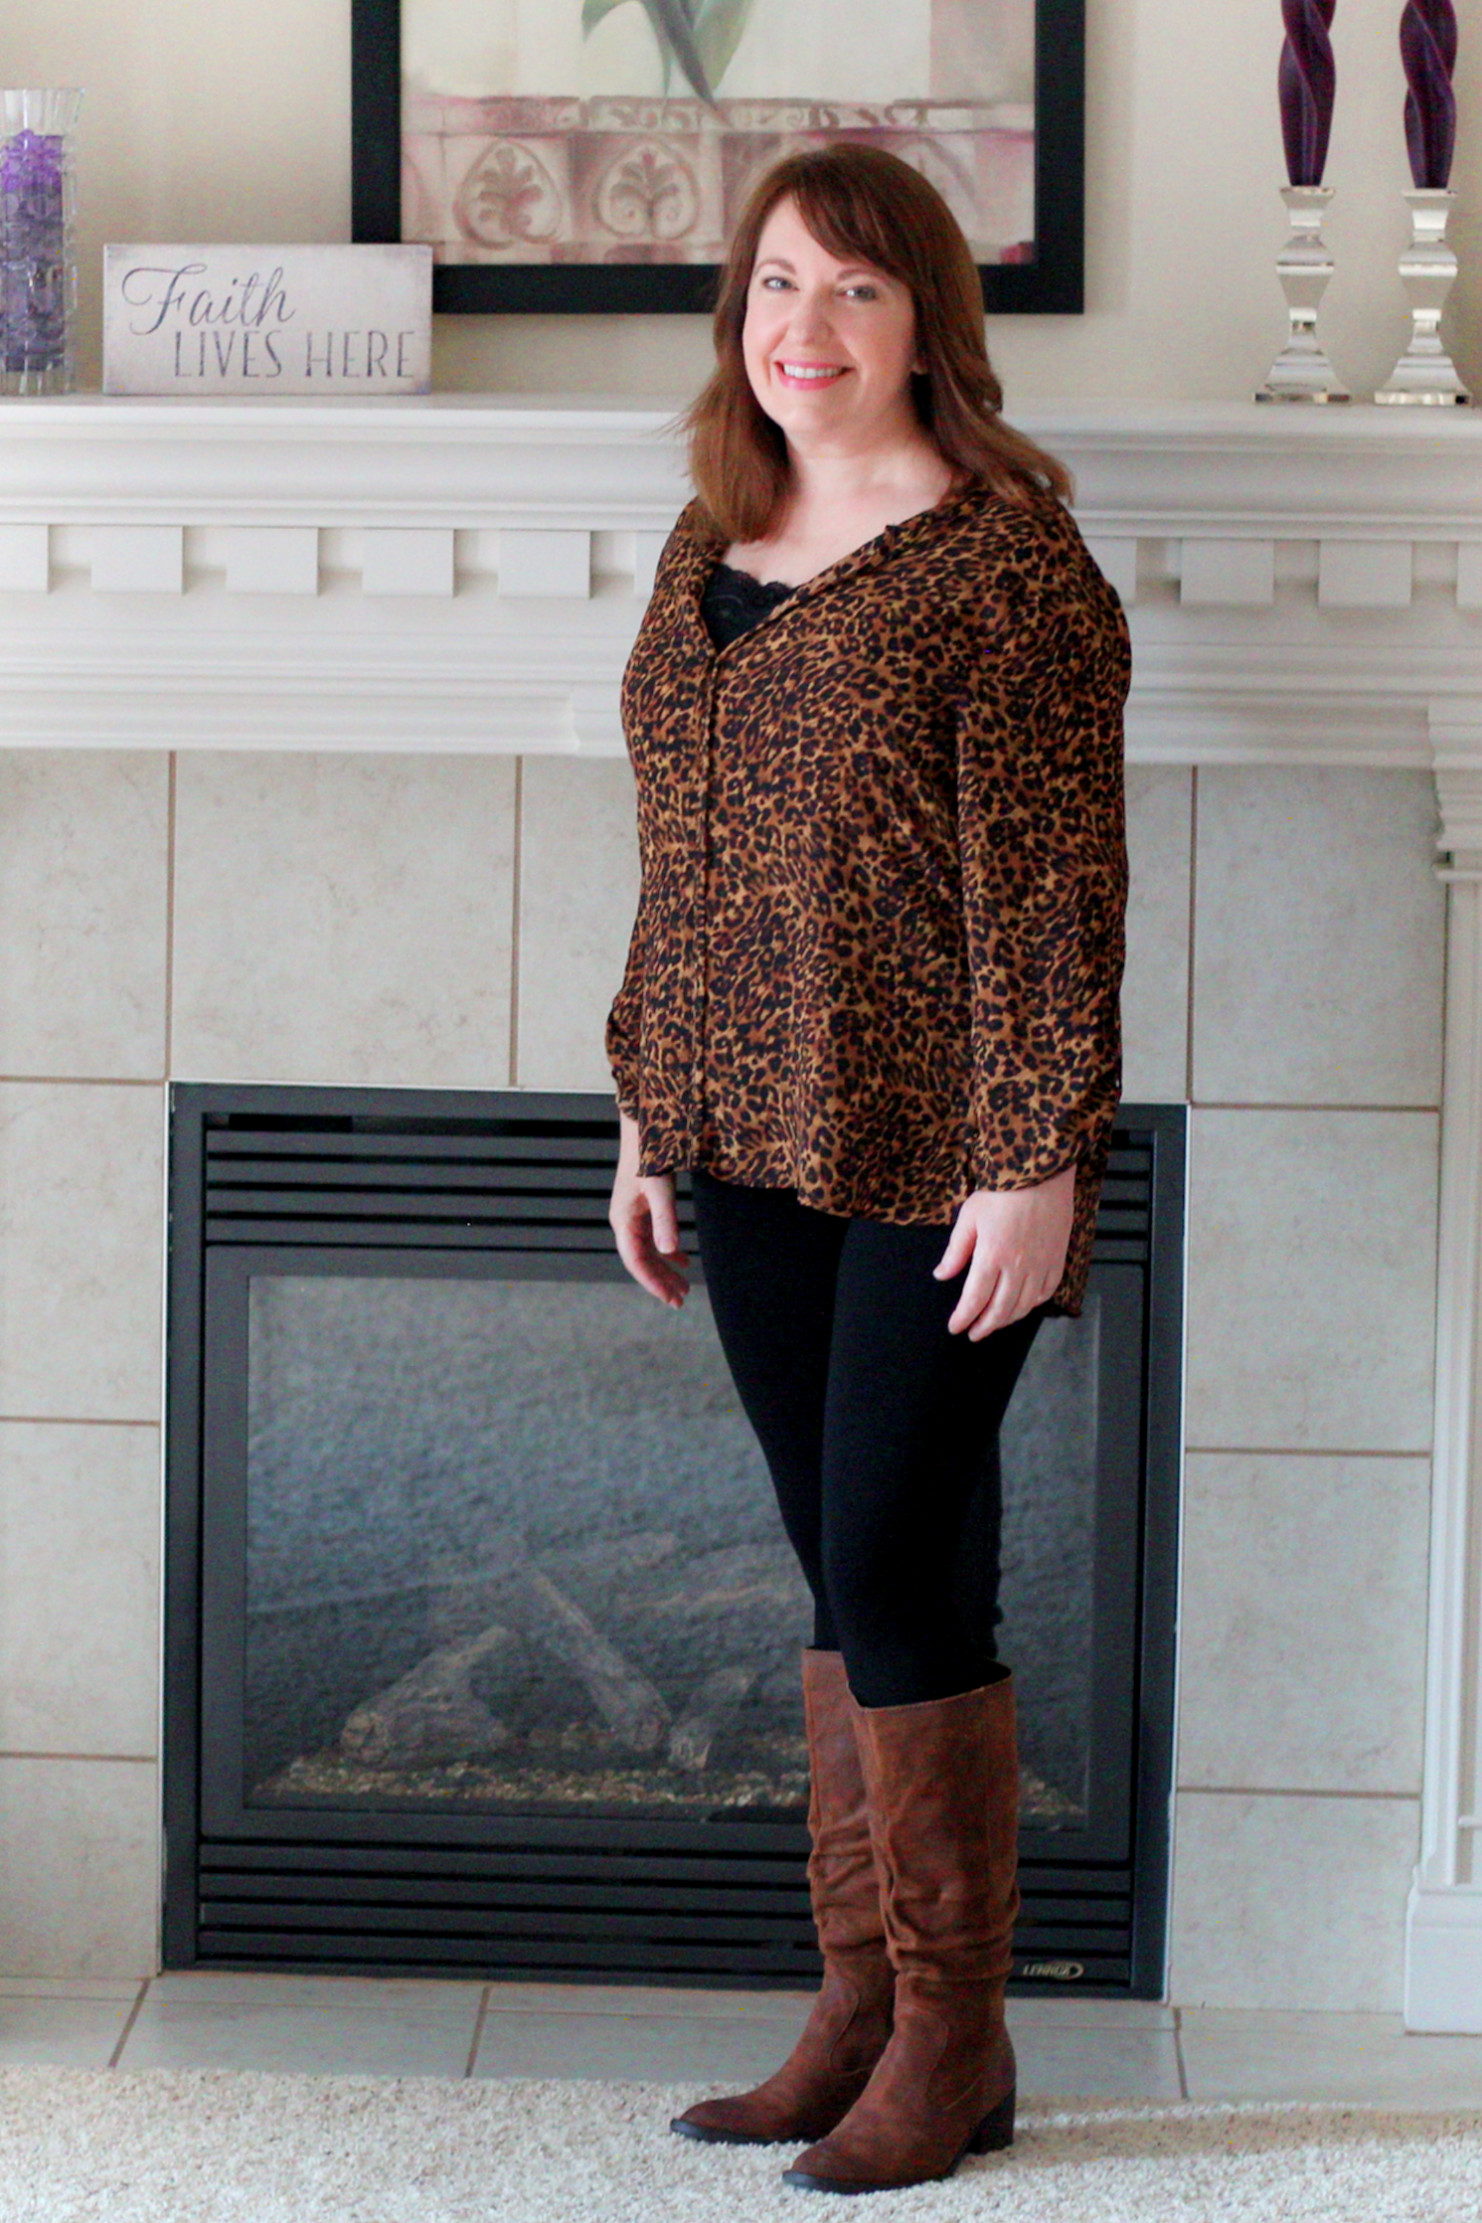 4 Ways to Wear a Leopard Print Blouse - Dressed in Faith